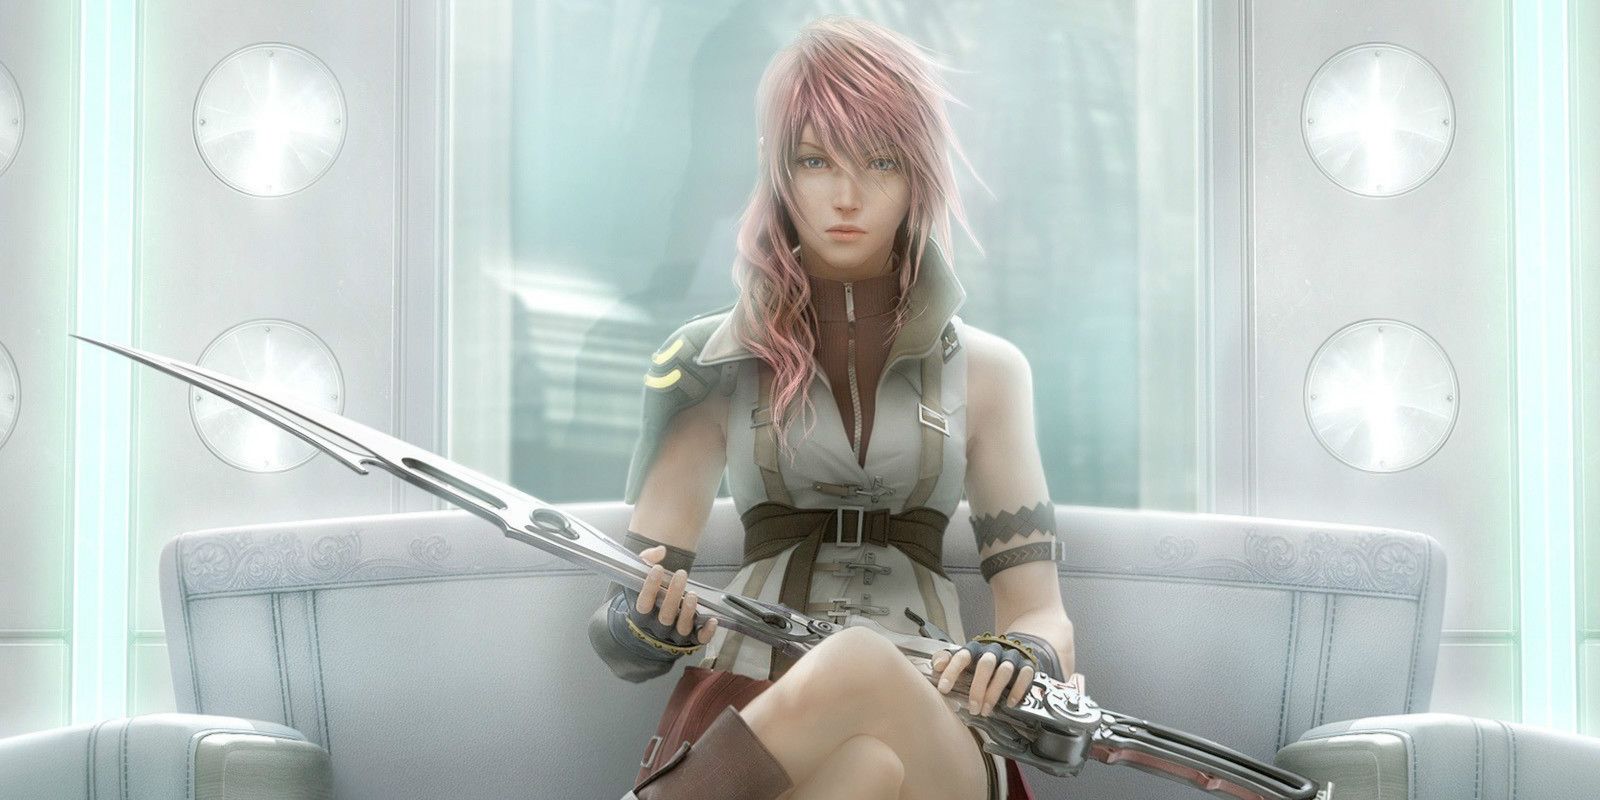 Protagonist Lightning from Final Fantasy 13 holding a weapon while sitting on a white couch.